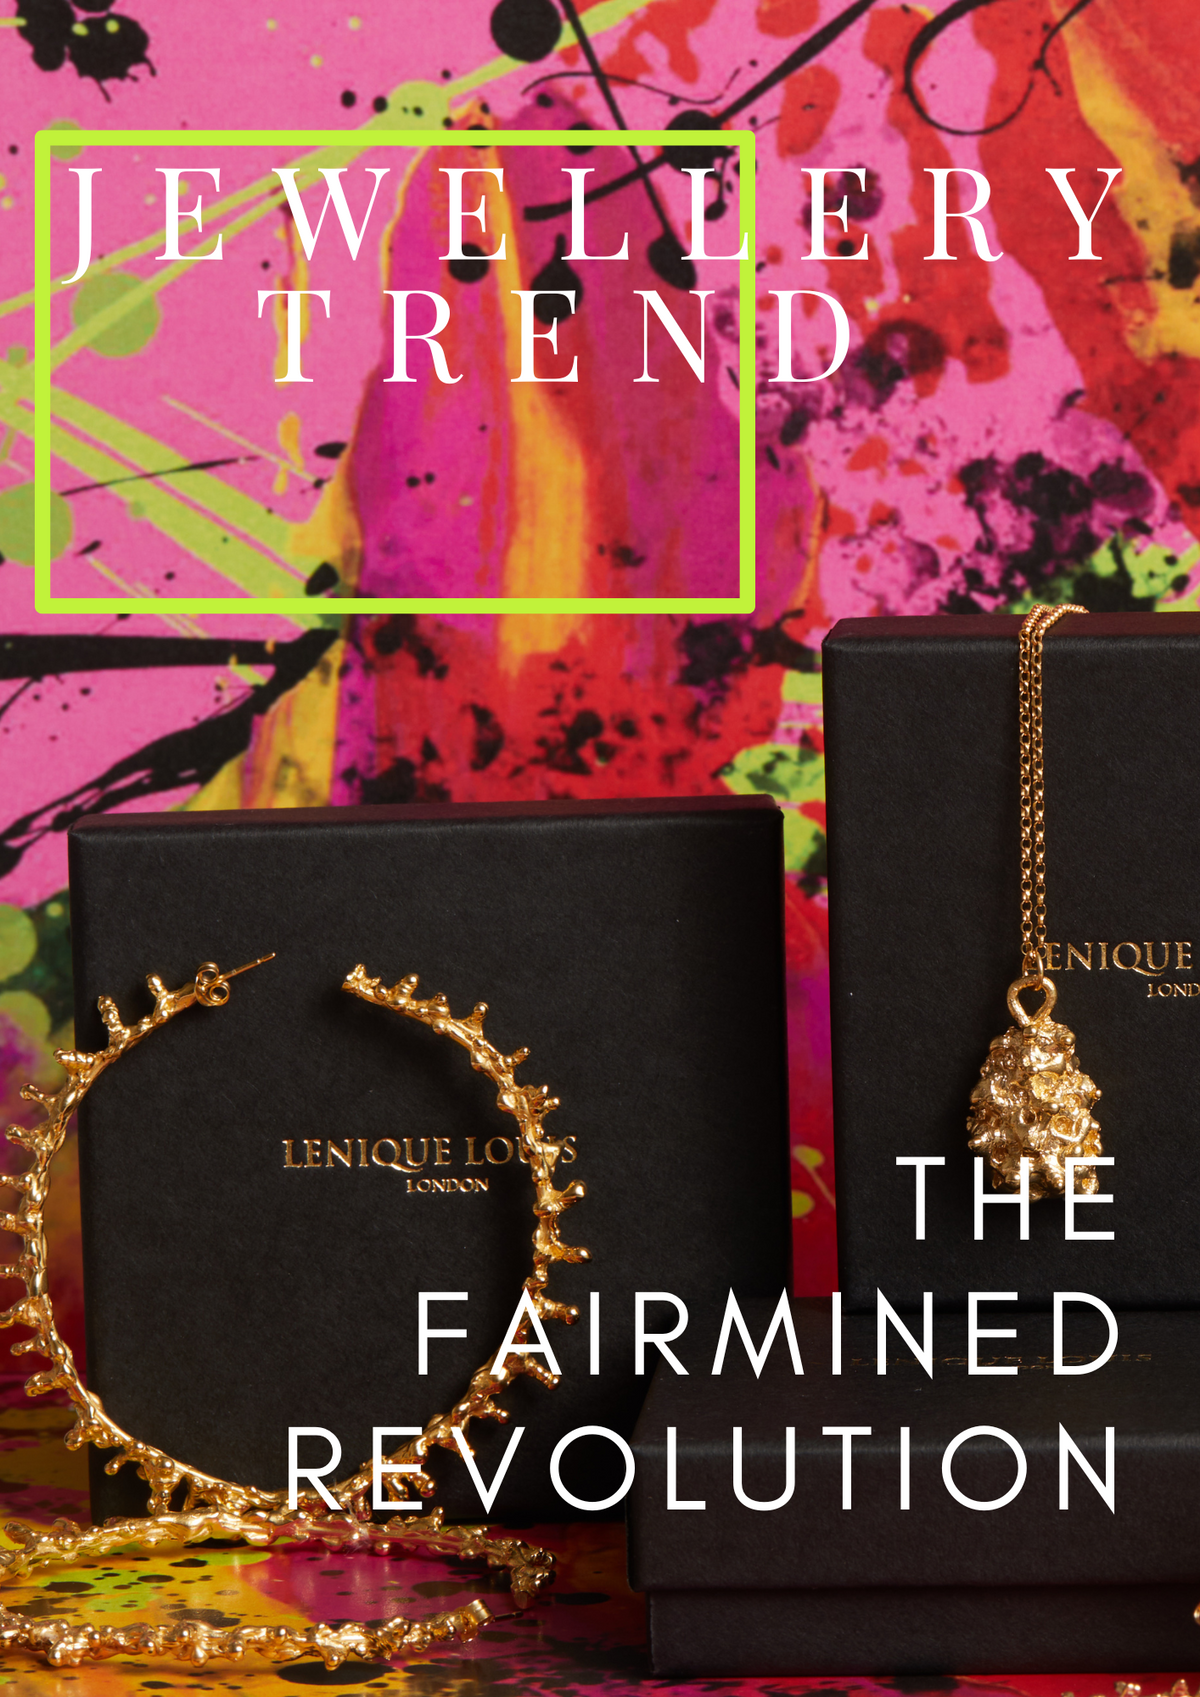 Shine Bright with Fairmined Jewellery: Ethical Glamour for the Conscious Consumer Lenique Louis